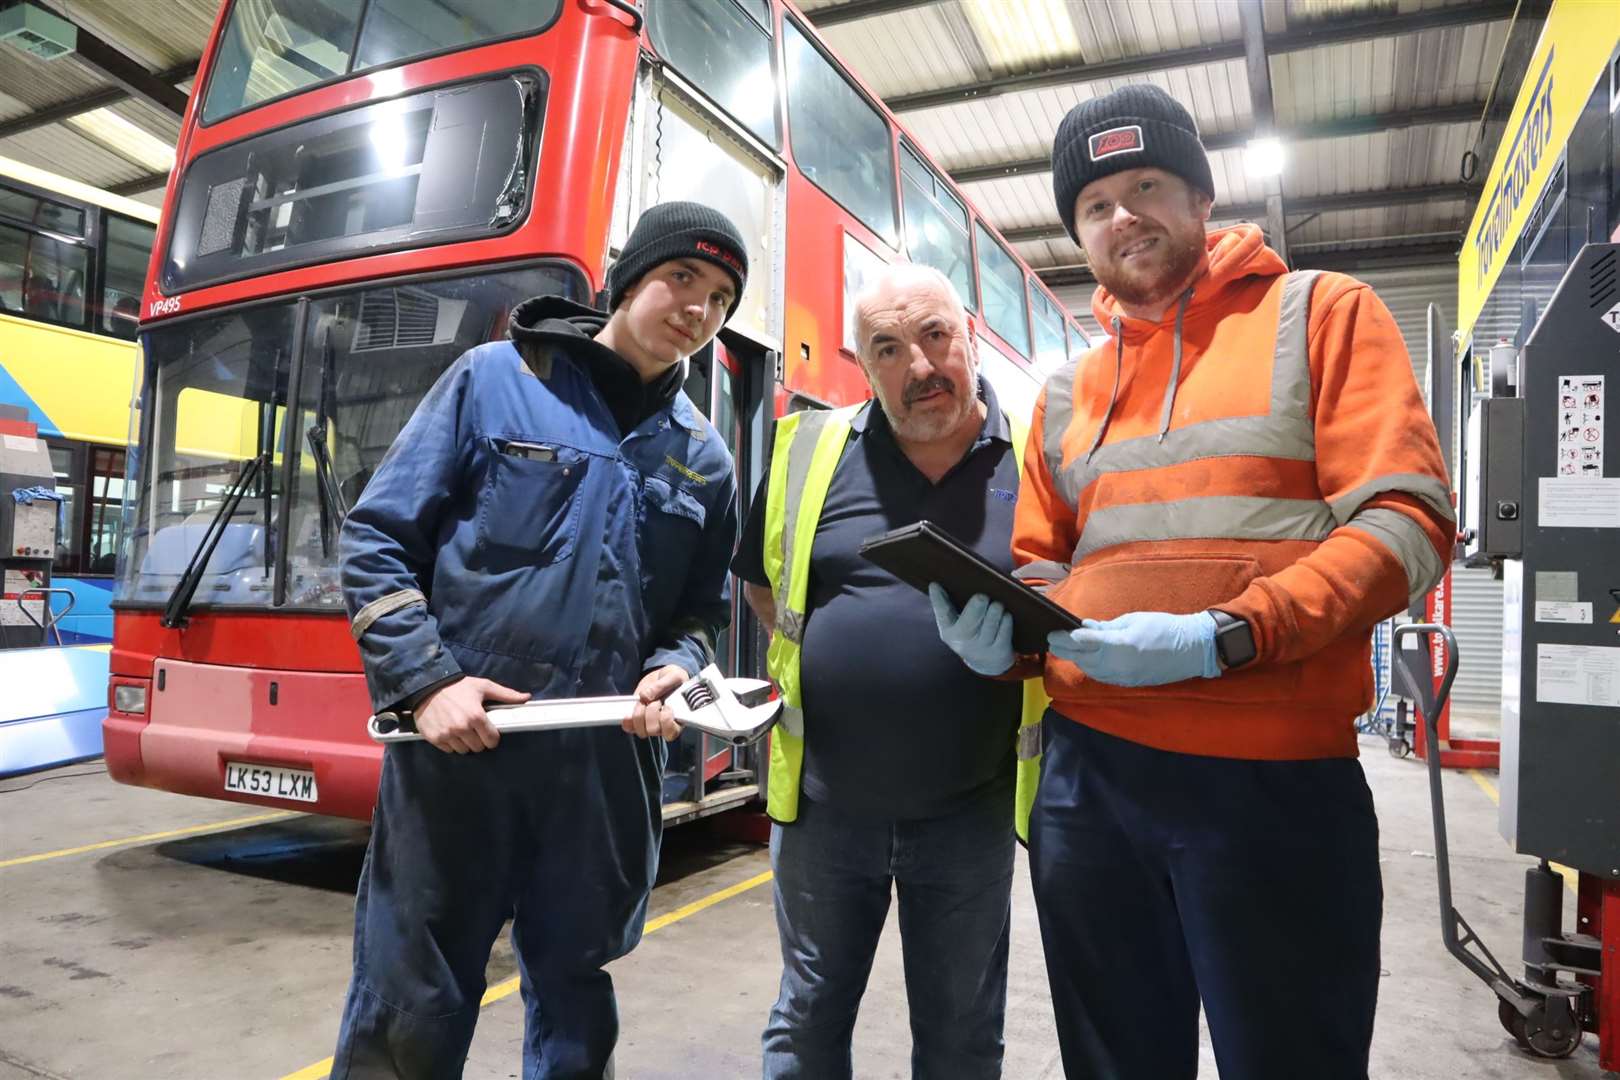 Tim Lambkin, centre, of Travel Masters with apprentices Tim Lambkin and James Chisman. The company donated a former London double-decker for the Sheppey Support Bus project